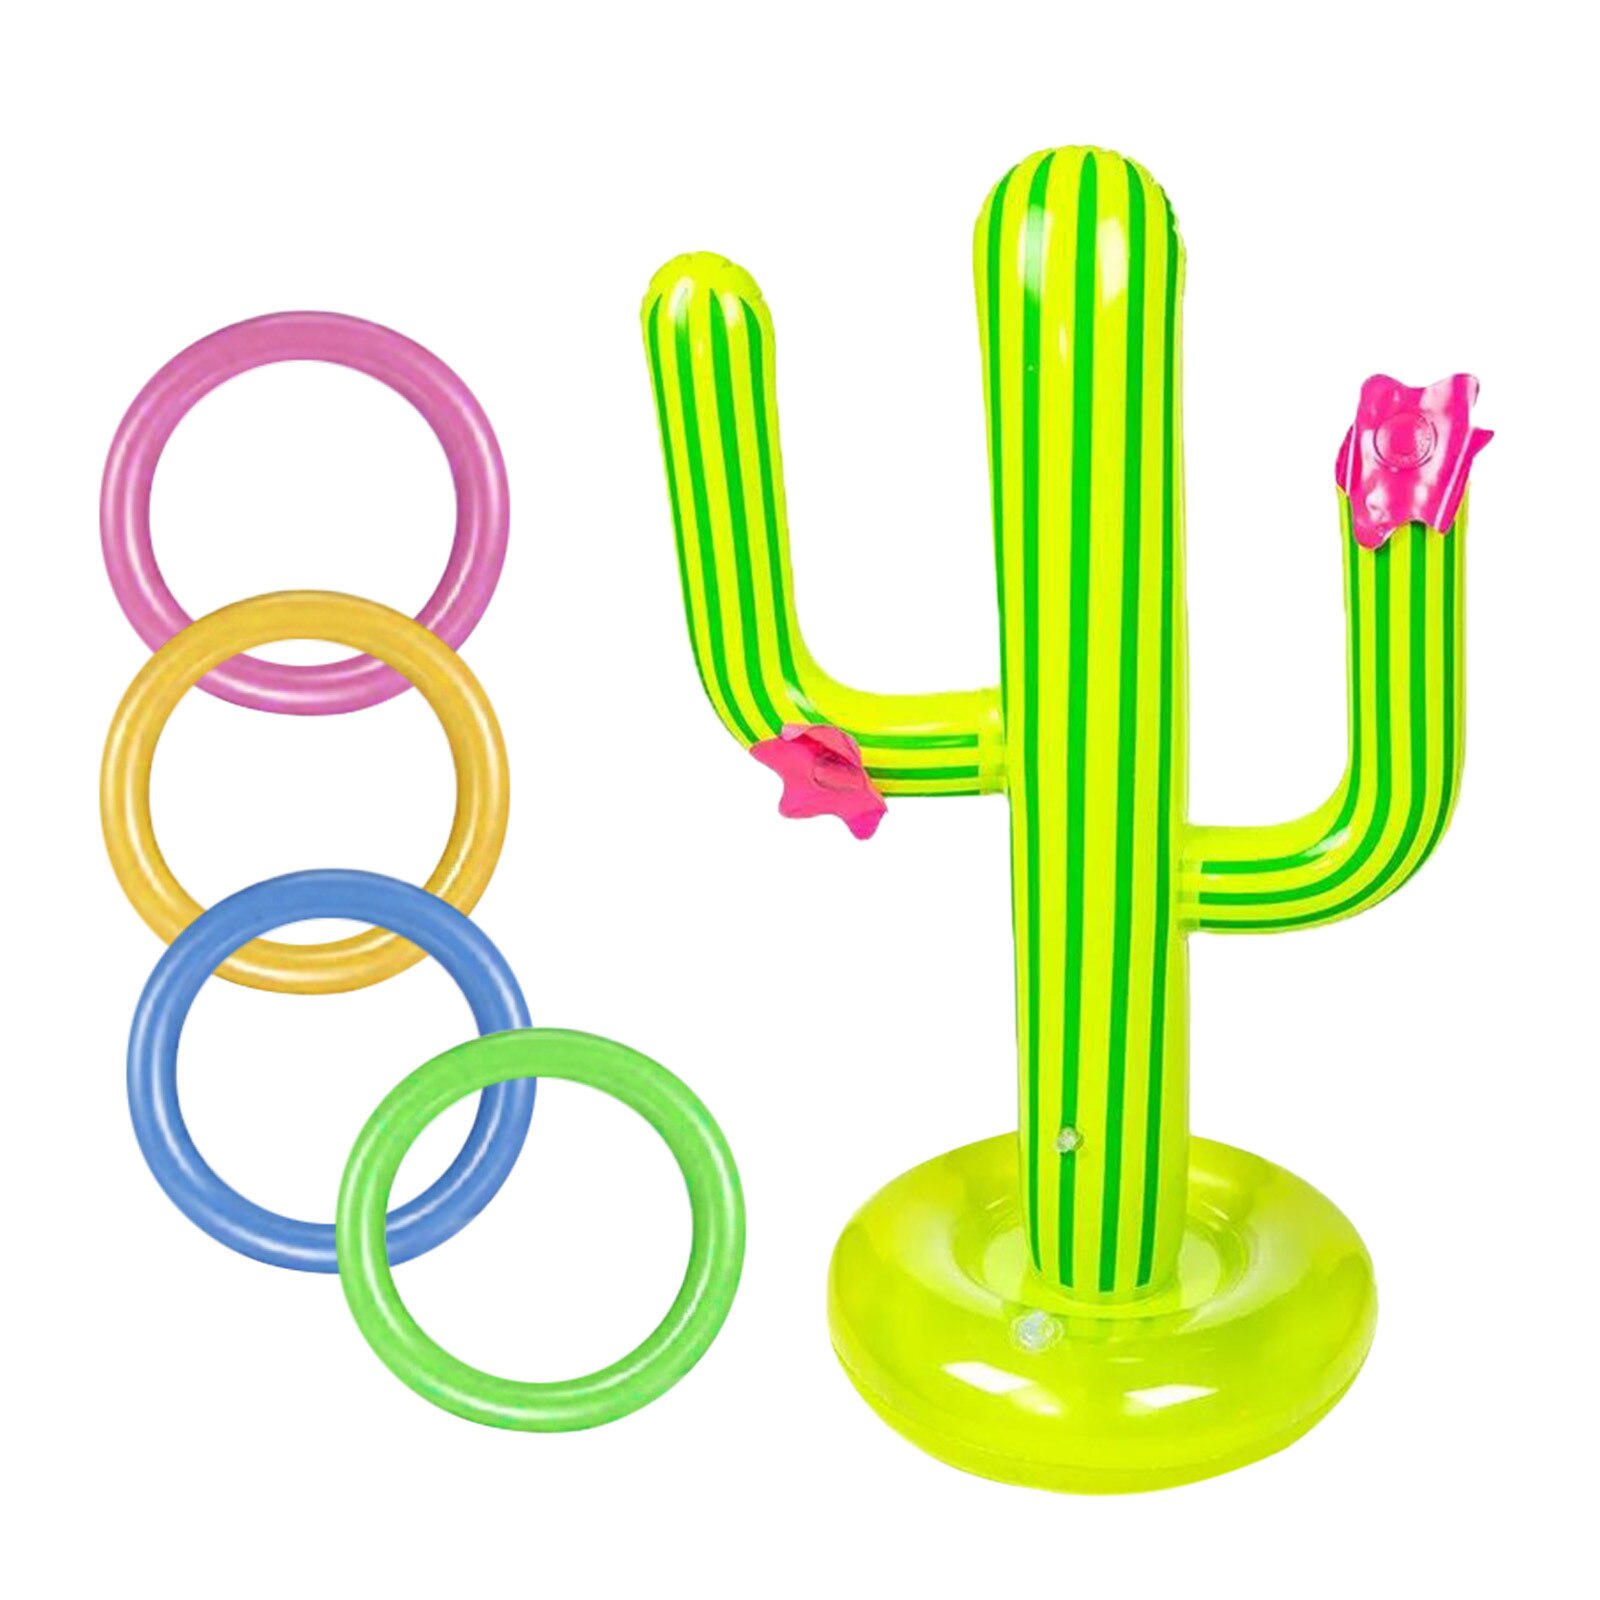 shop with crypto buy Summer Playing Swimming Pool PVC Inflatable Cactus Pool Tossing Game Set Floating Pool Toys Beach Party Supplies Party Travel f5 pay with bitcoin